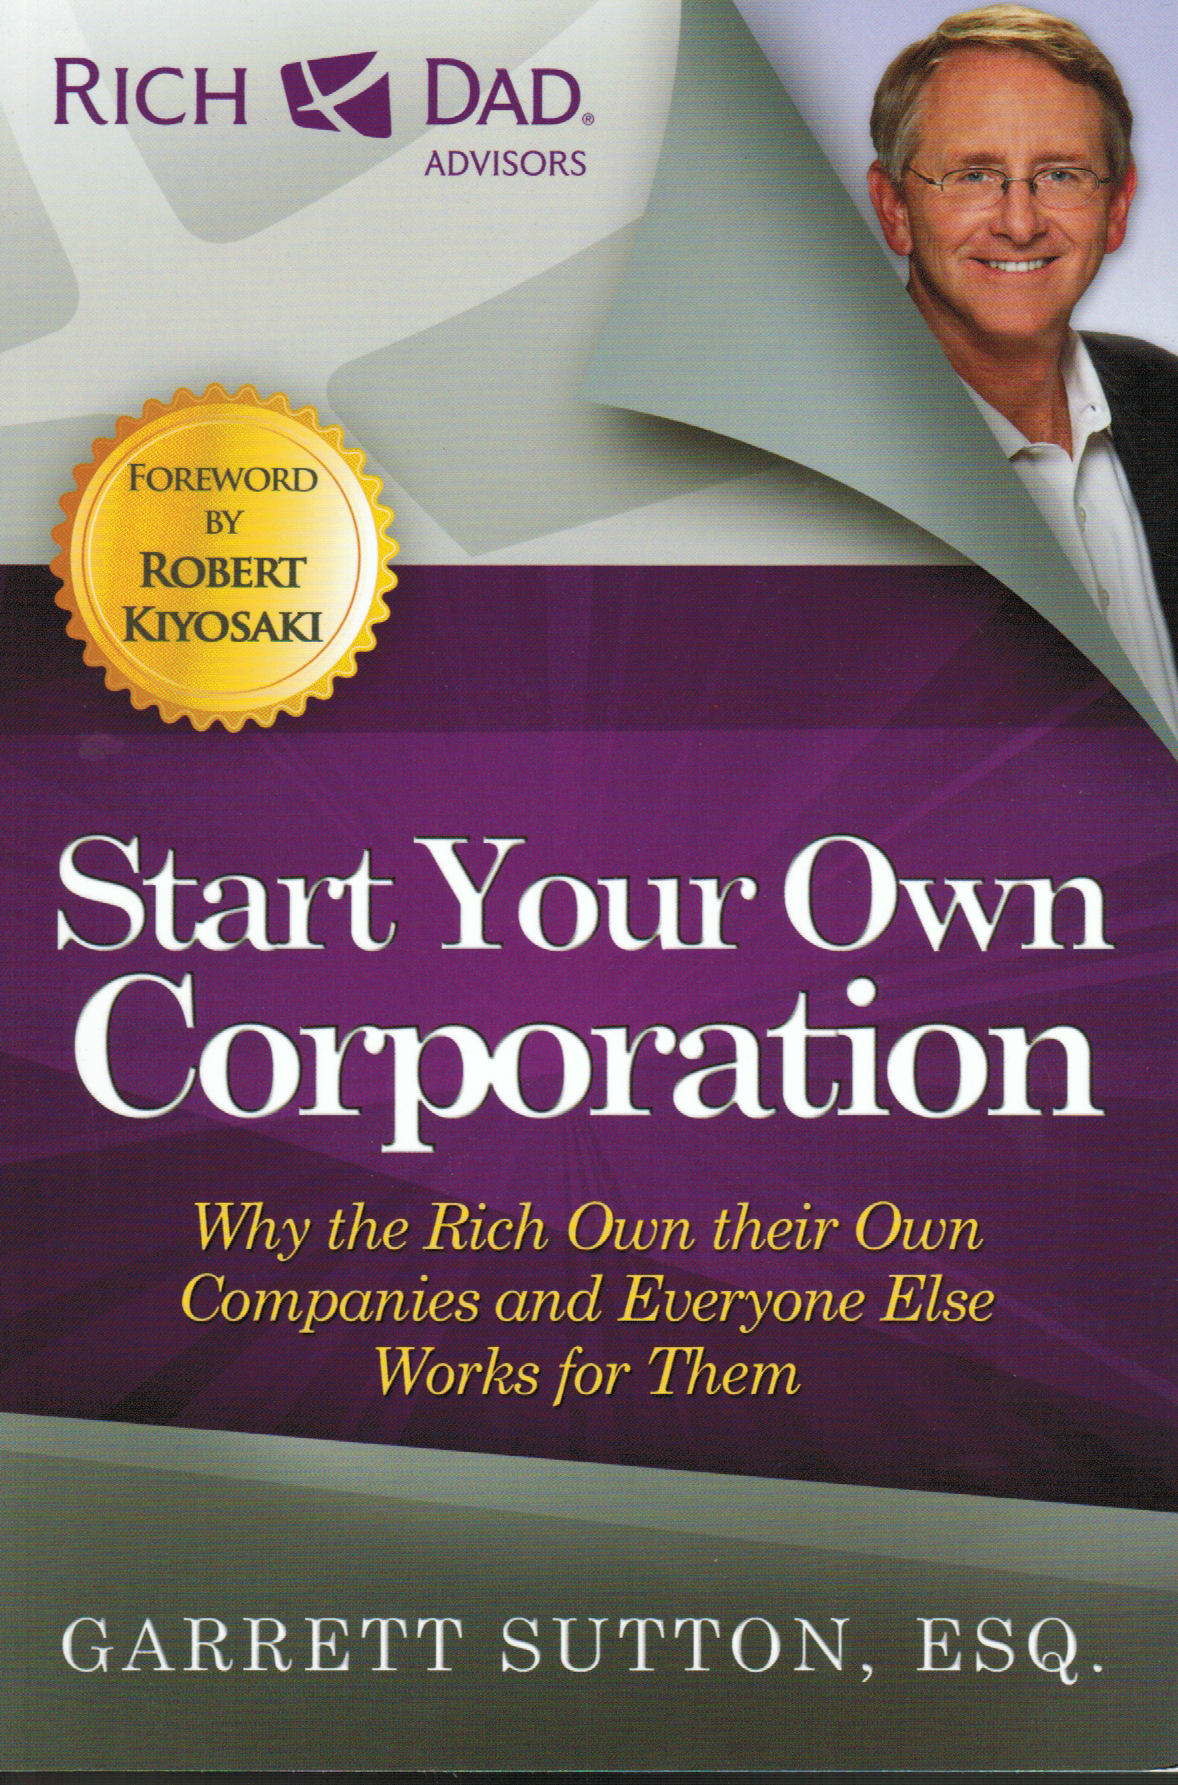 START YOUR OWN CORPORATION